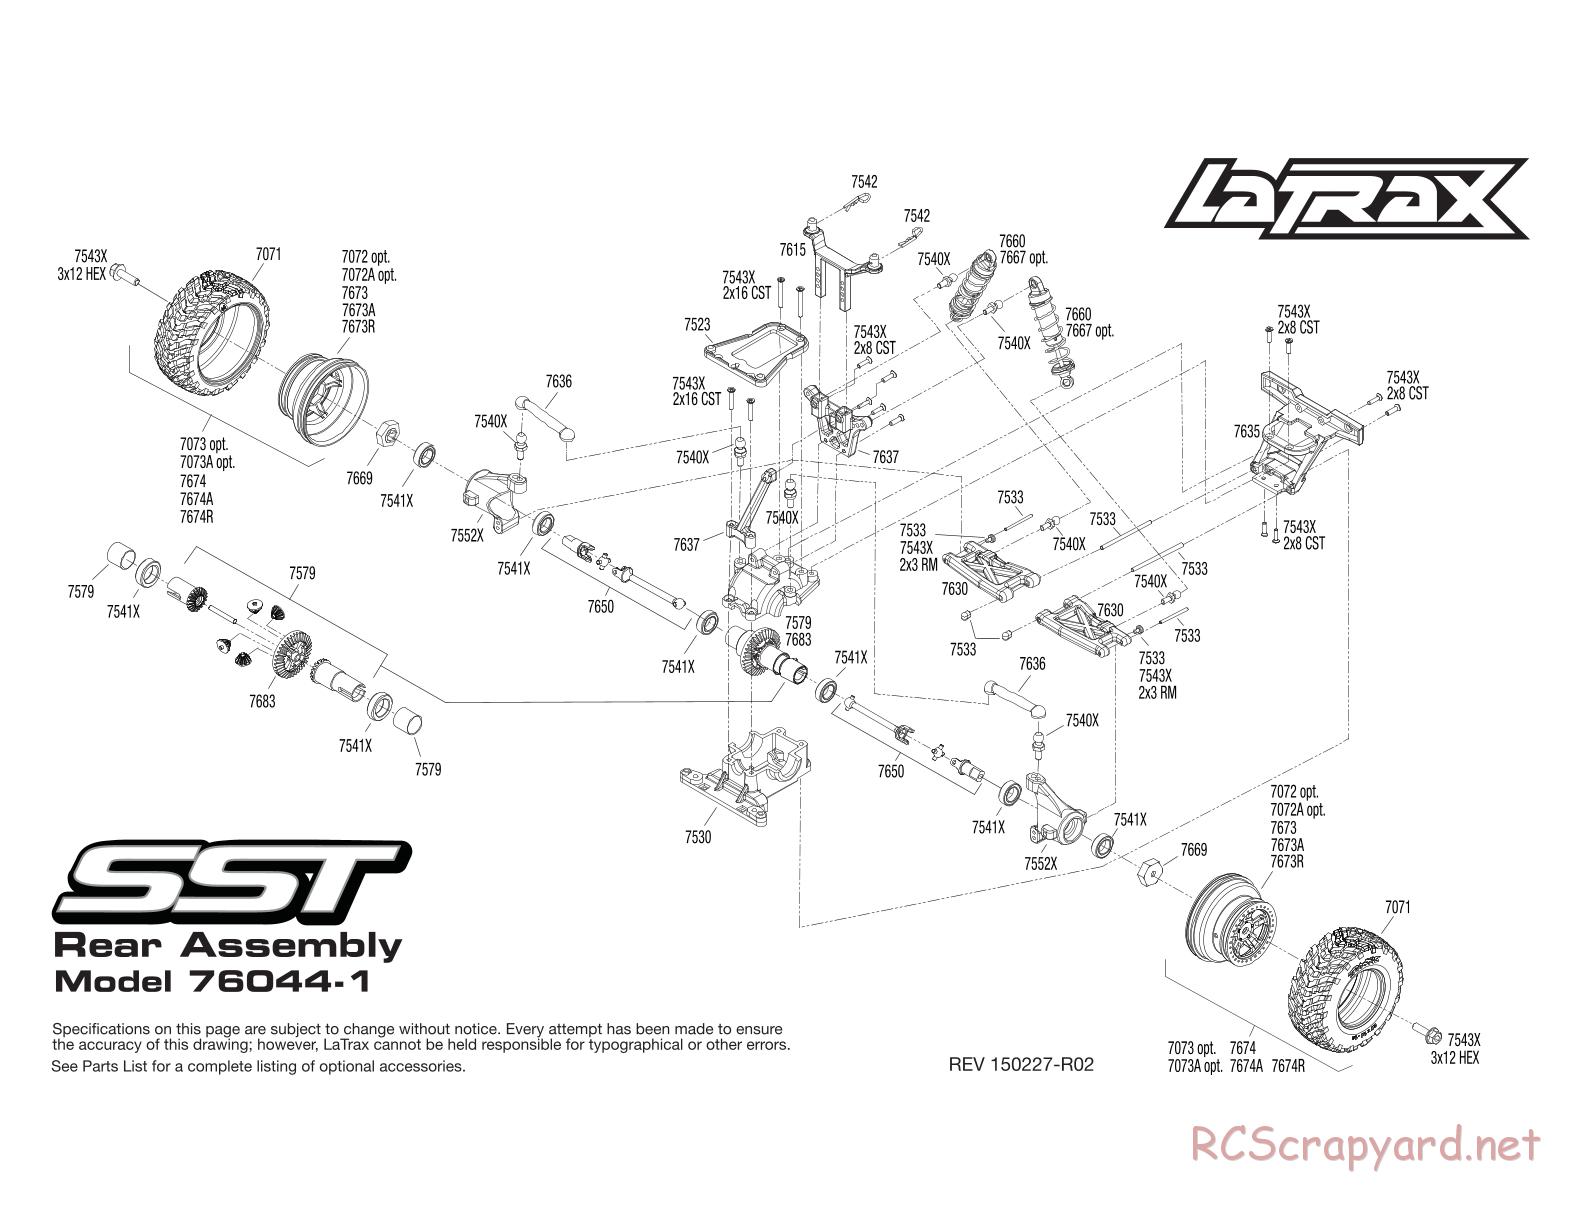 Traxxas - LaTrax SST (2014) - Exploded Views - Page 3